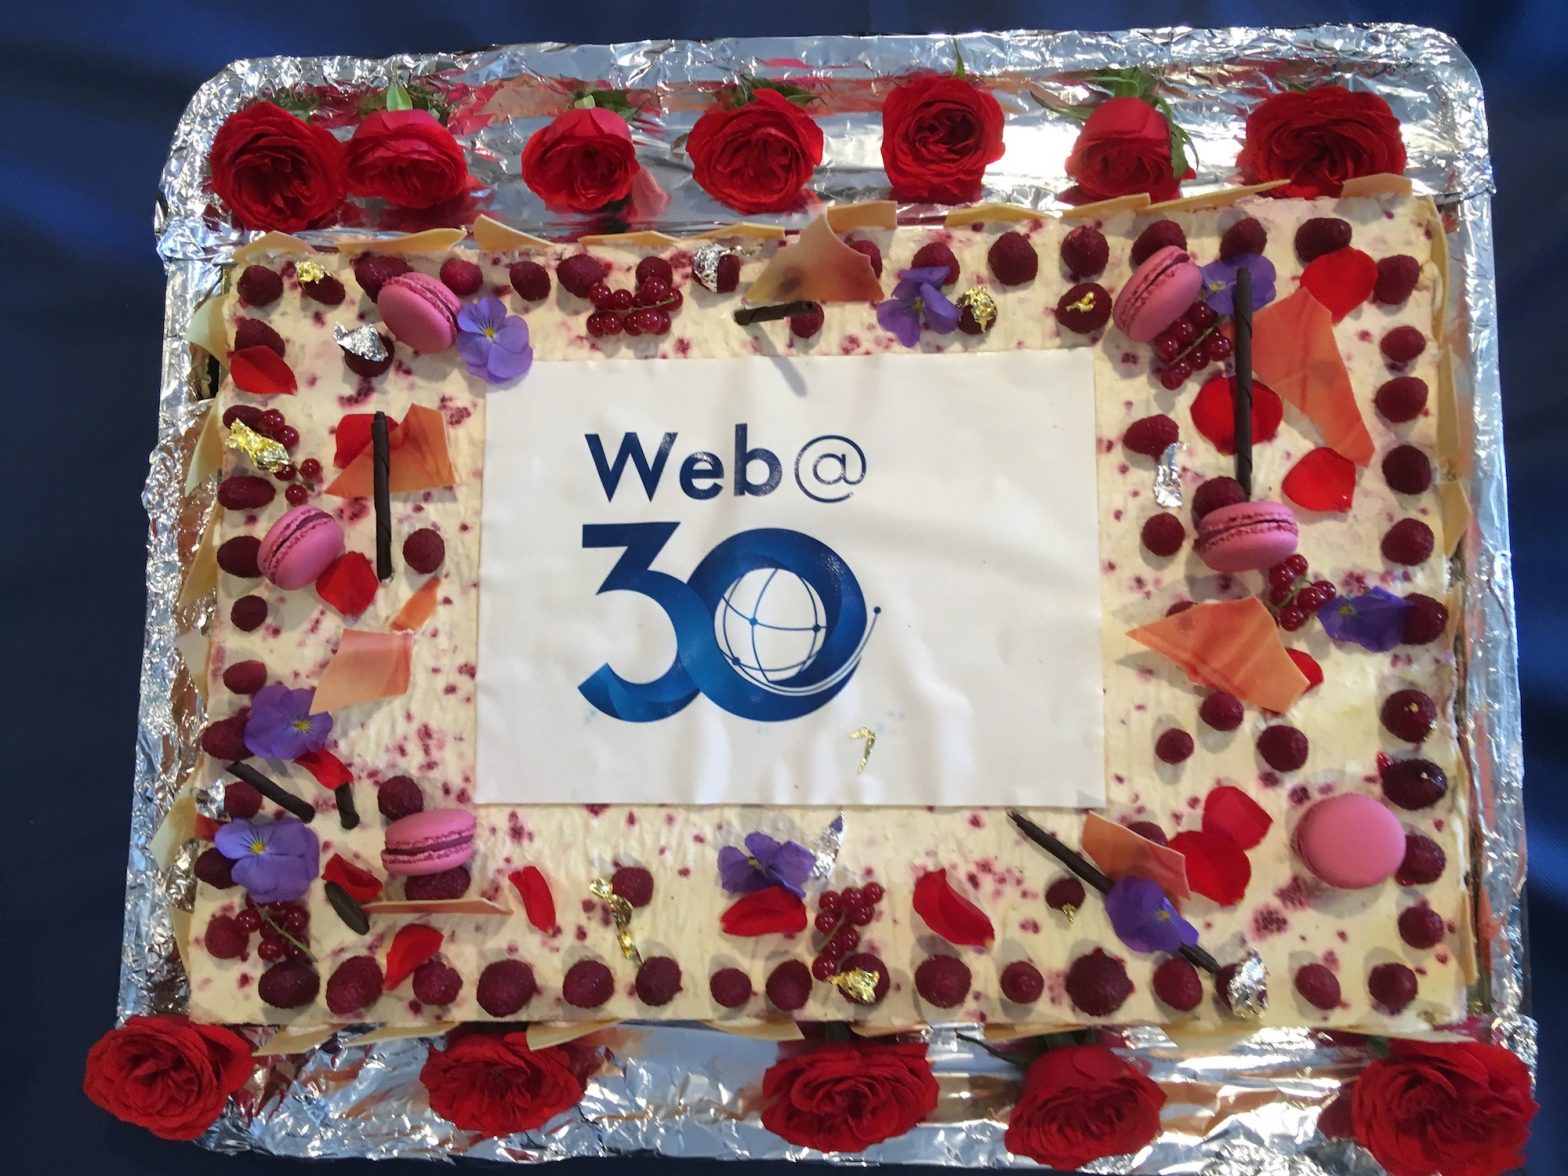 Cake for the Web @ 30